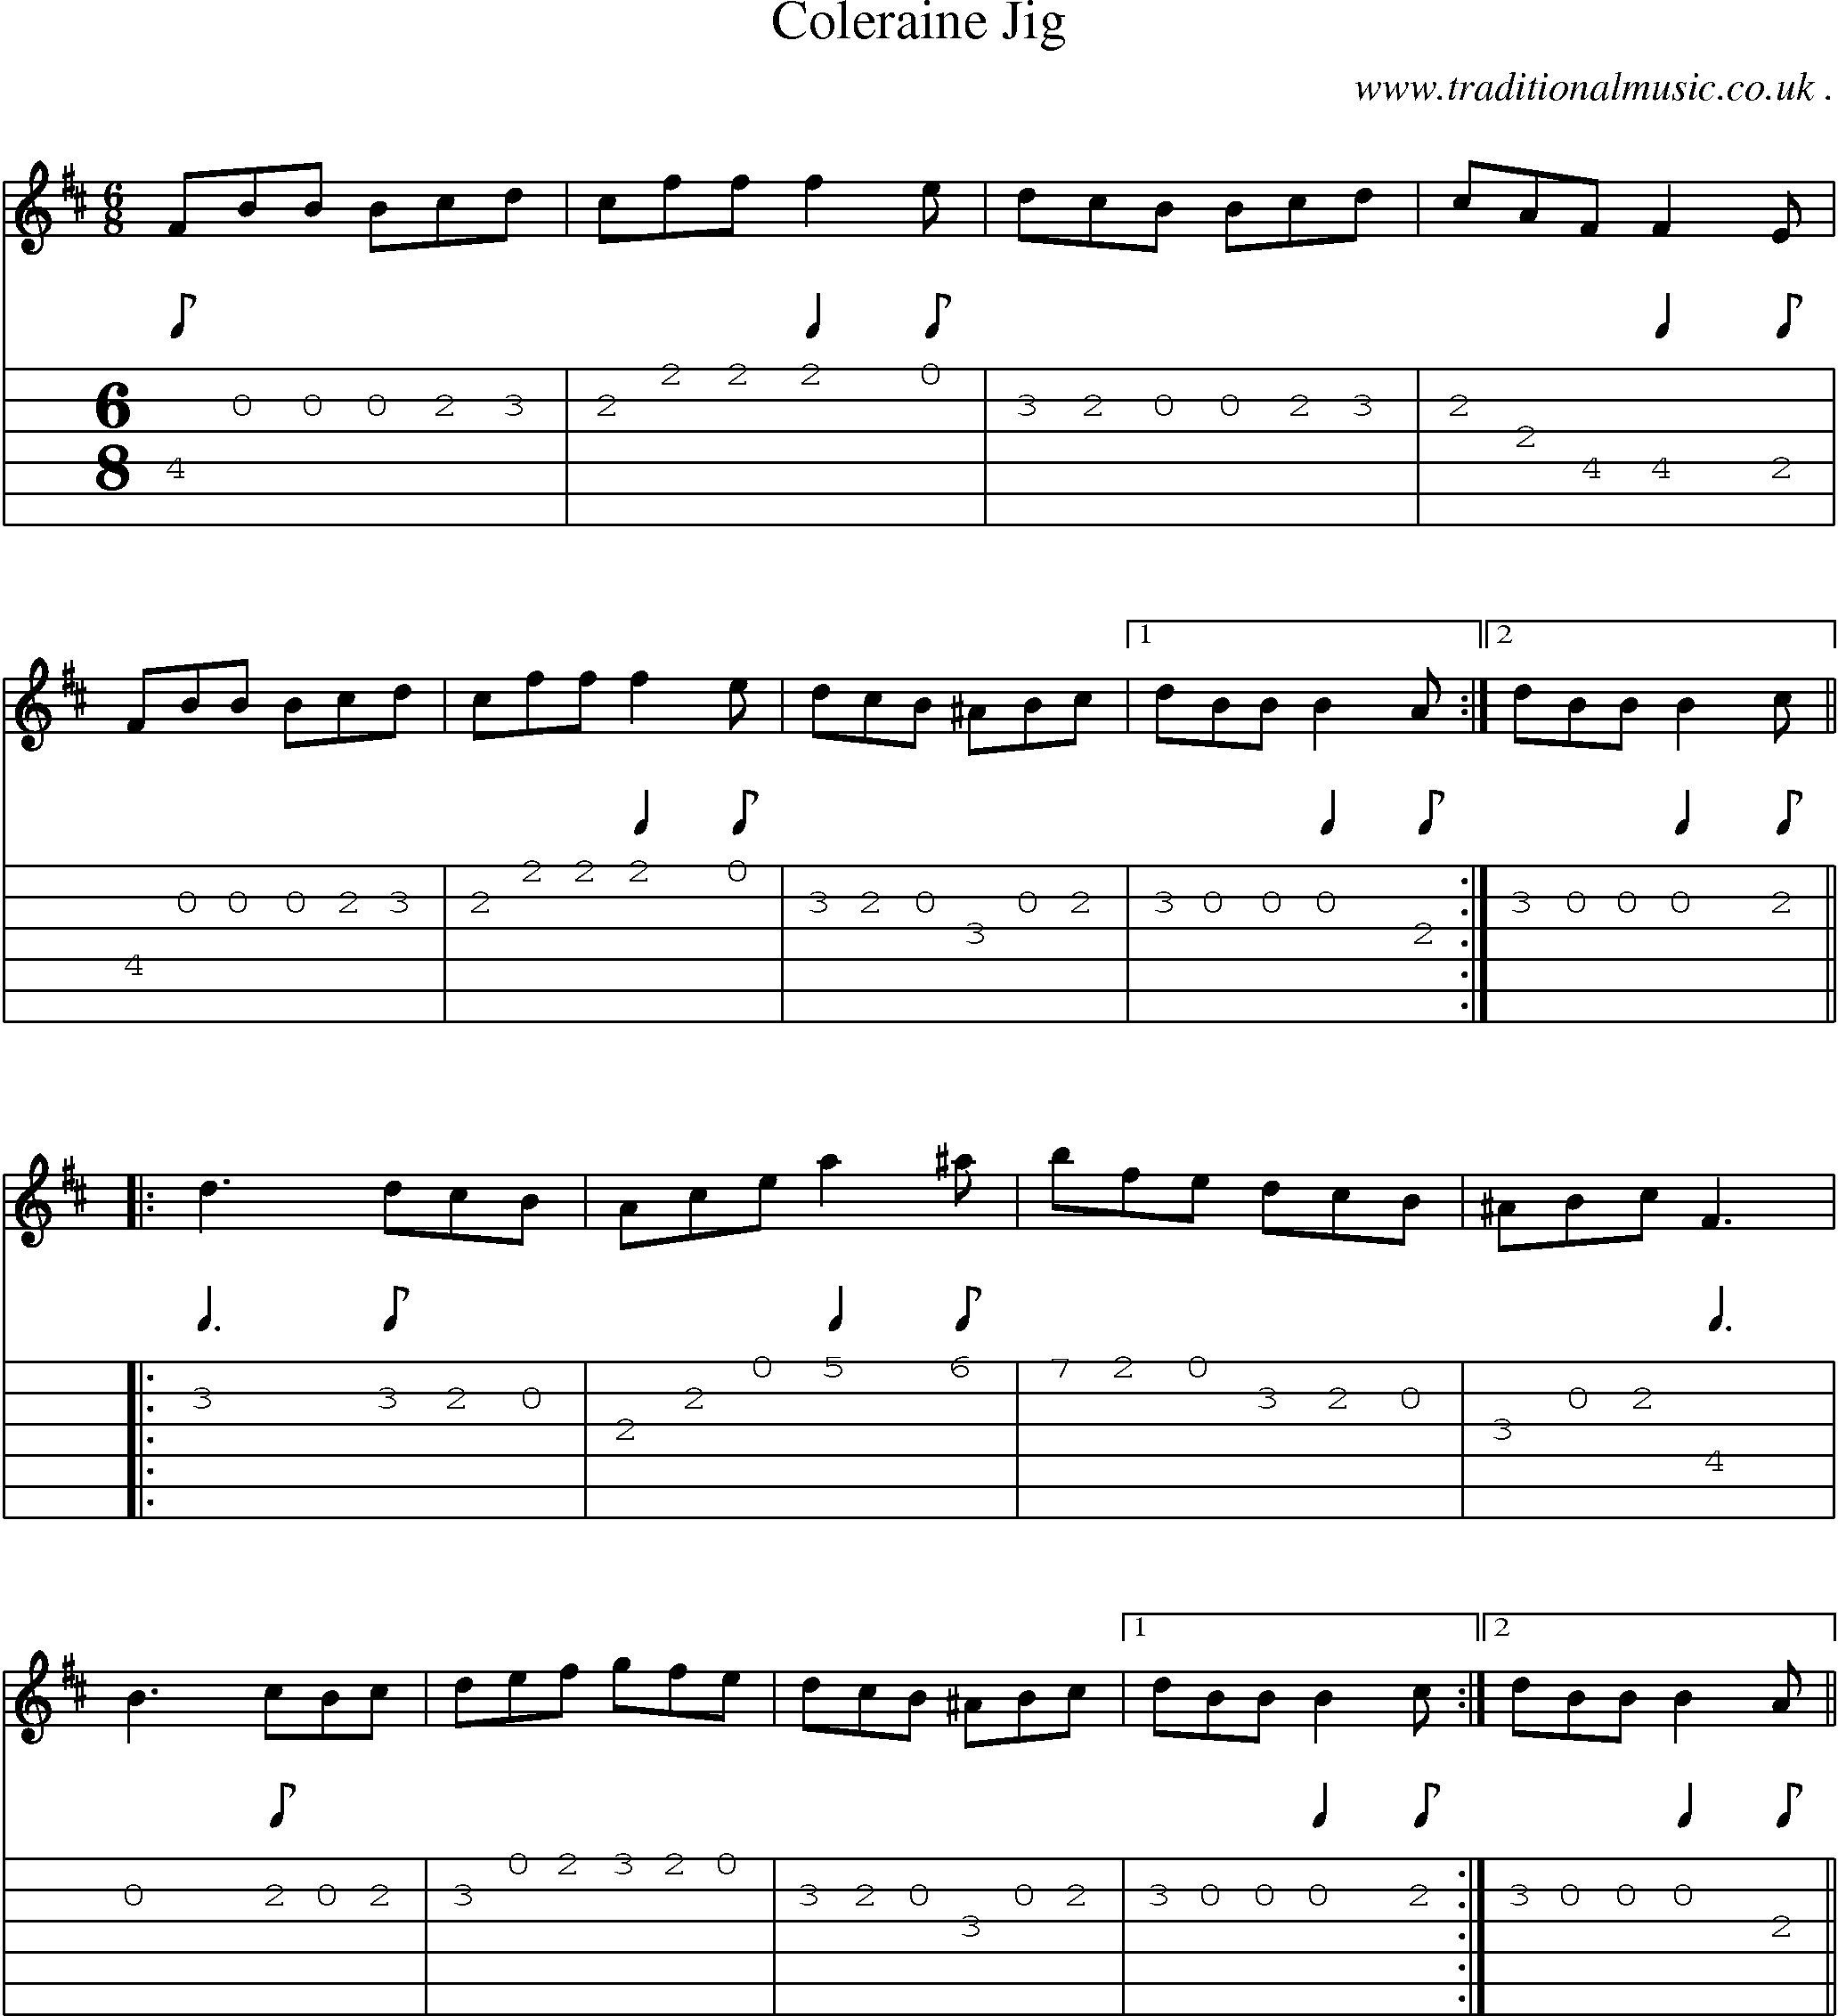 Sheet-Music and Guitar Tabs for Coleraine Jig